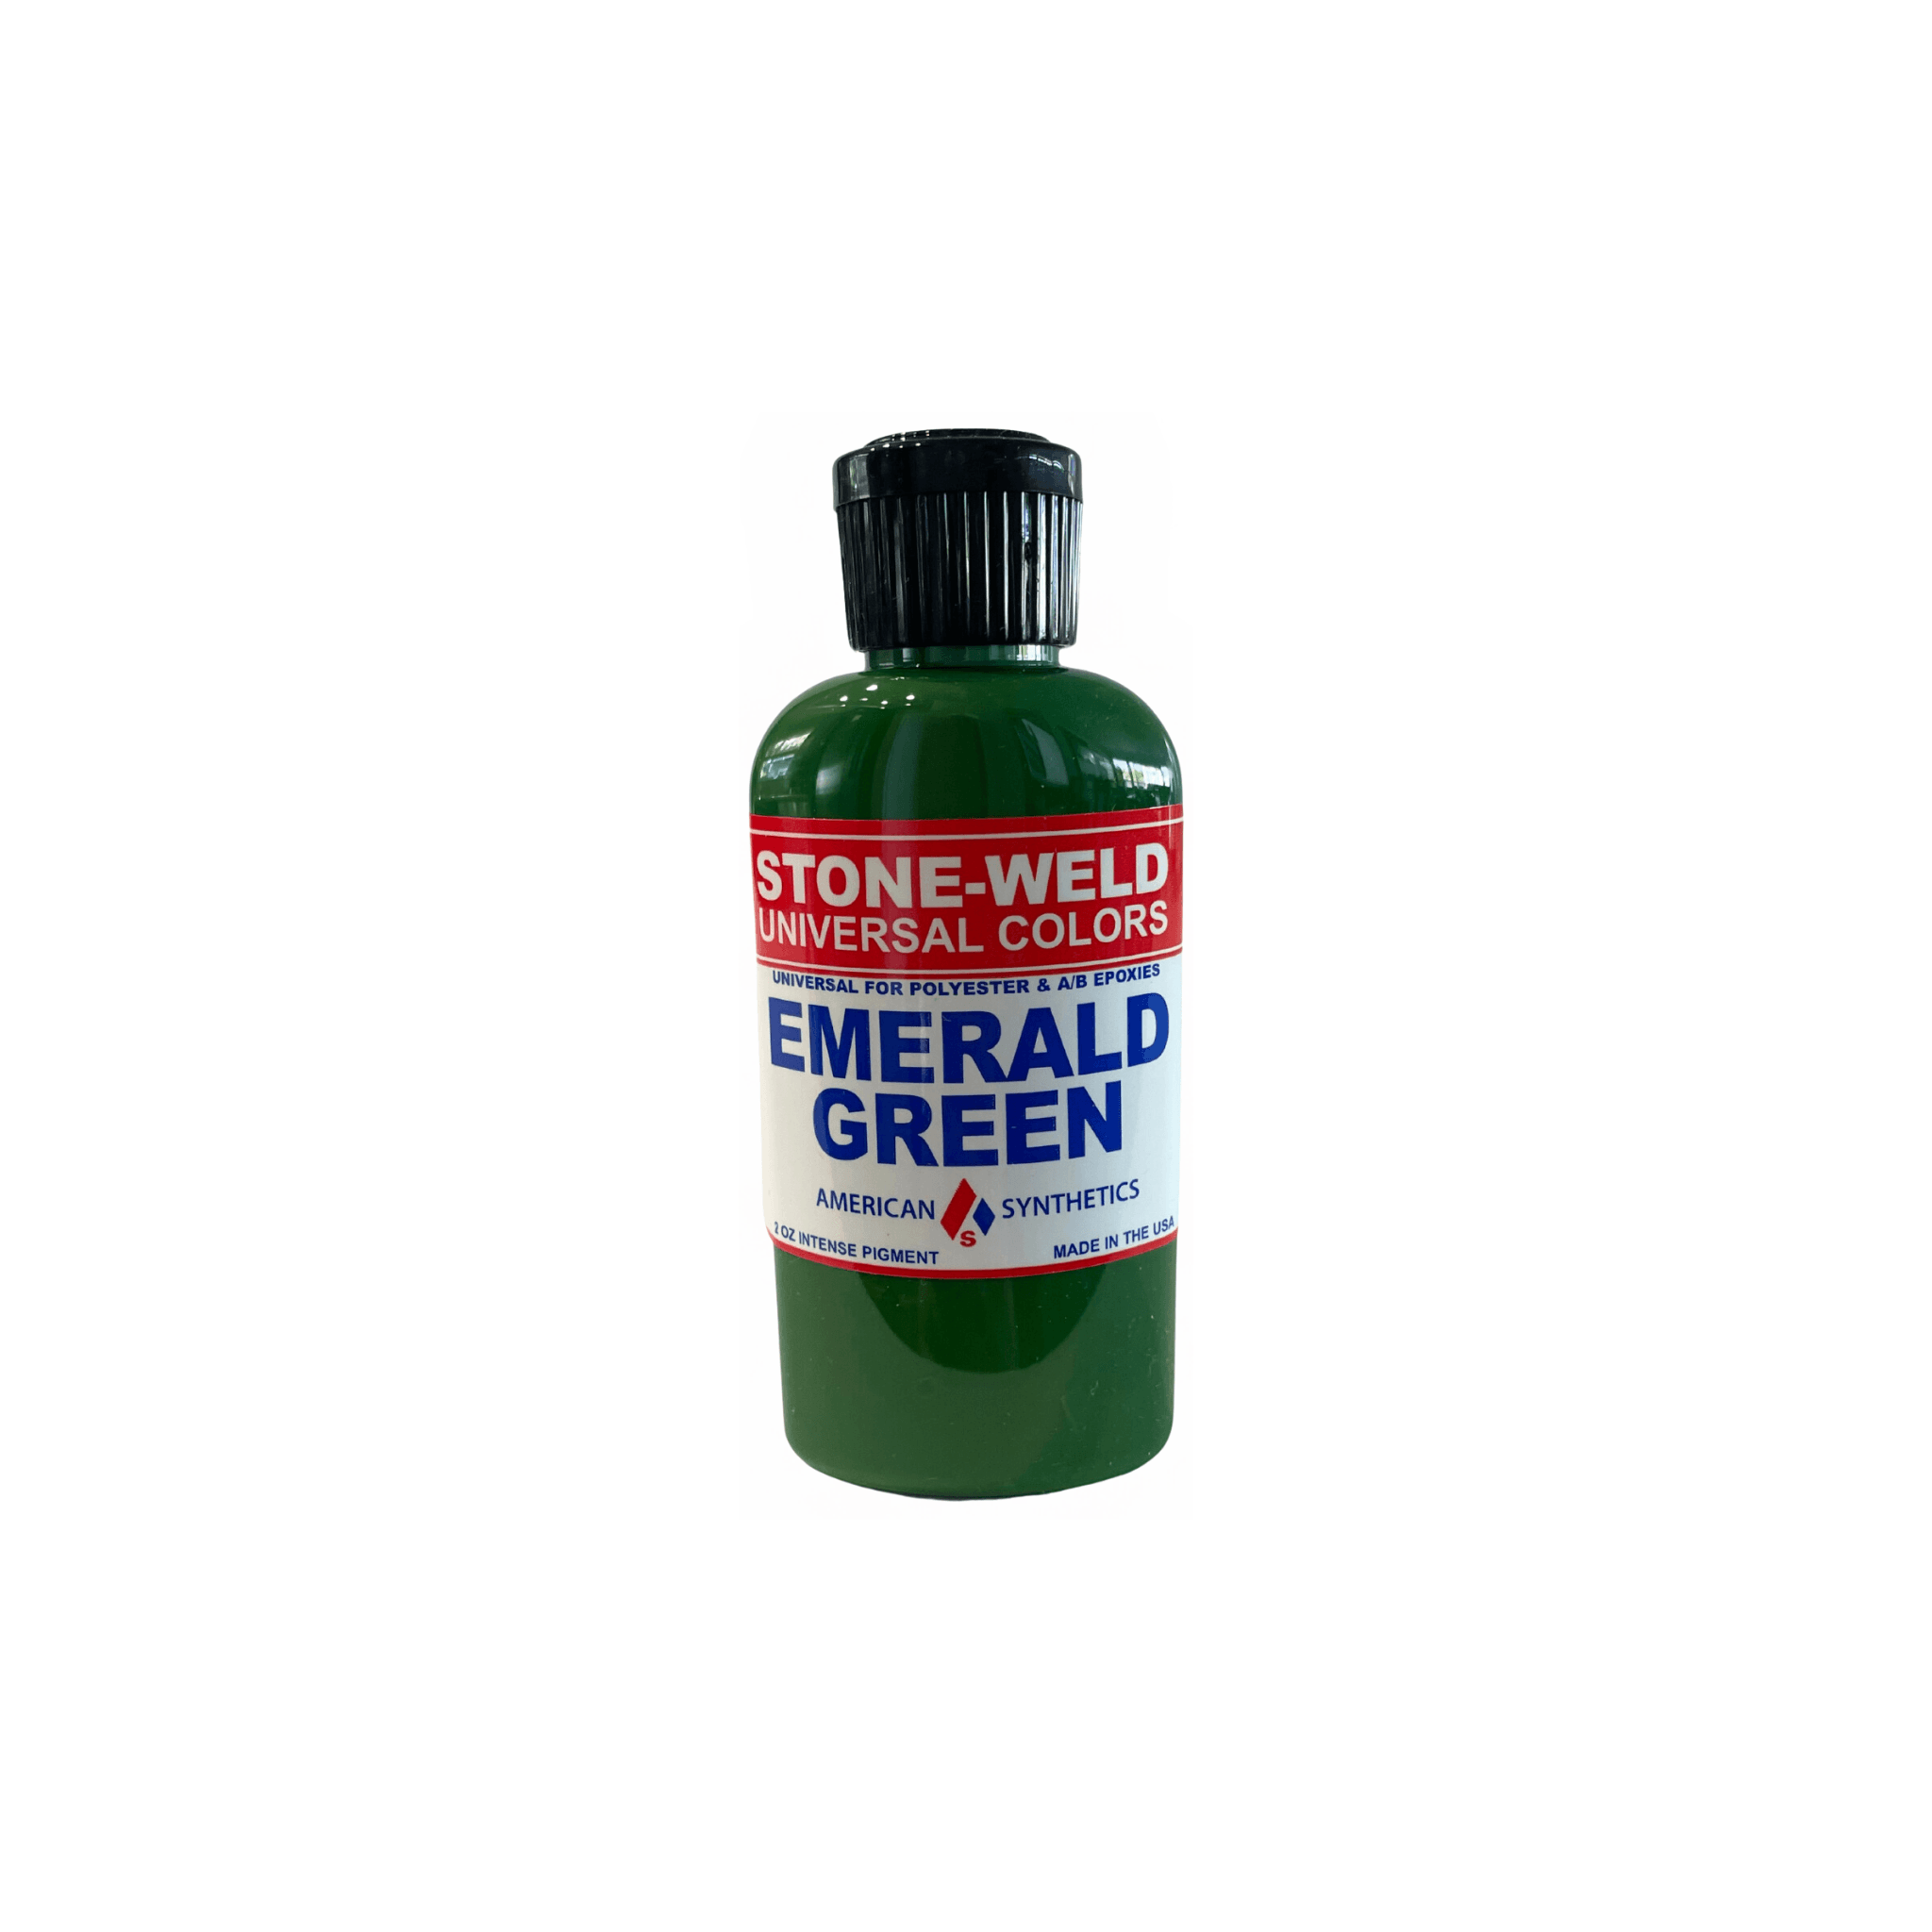 Stone-Weld 2 oz. Universal Color, Emerald Green - Direct Stone Tool Supply, Inc